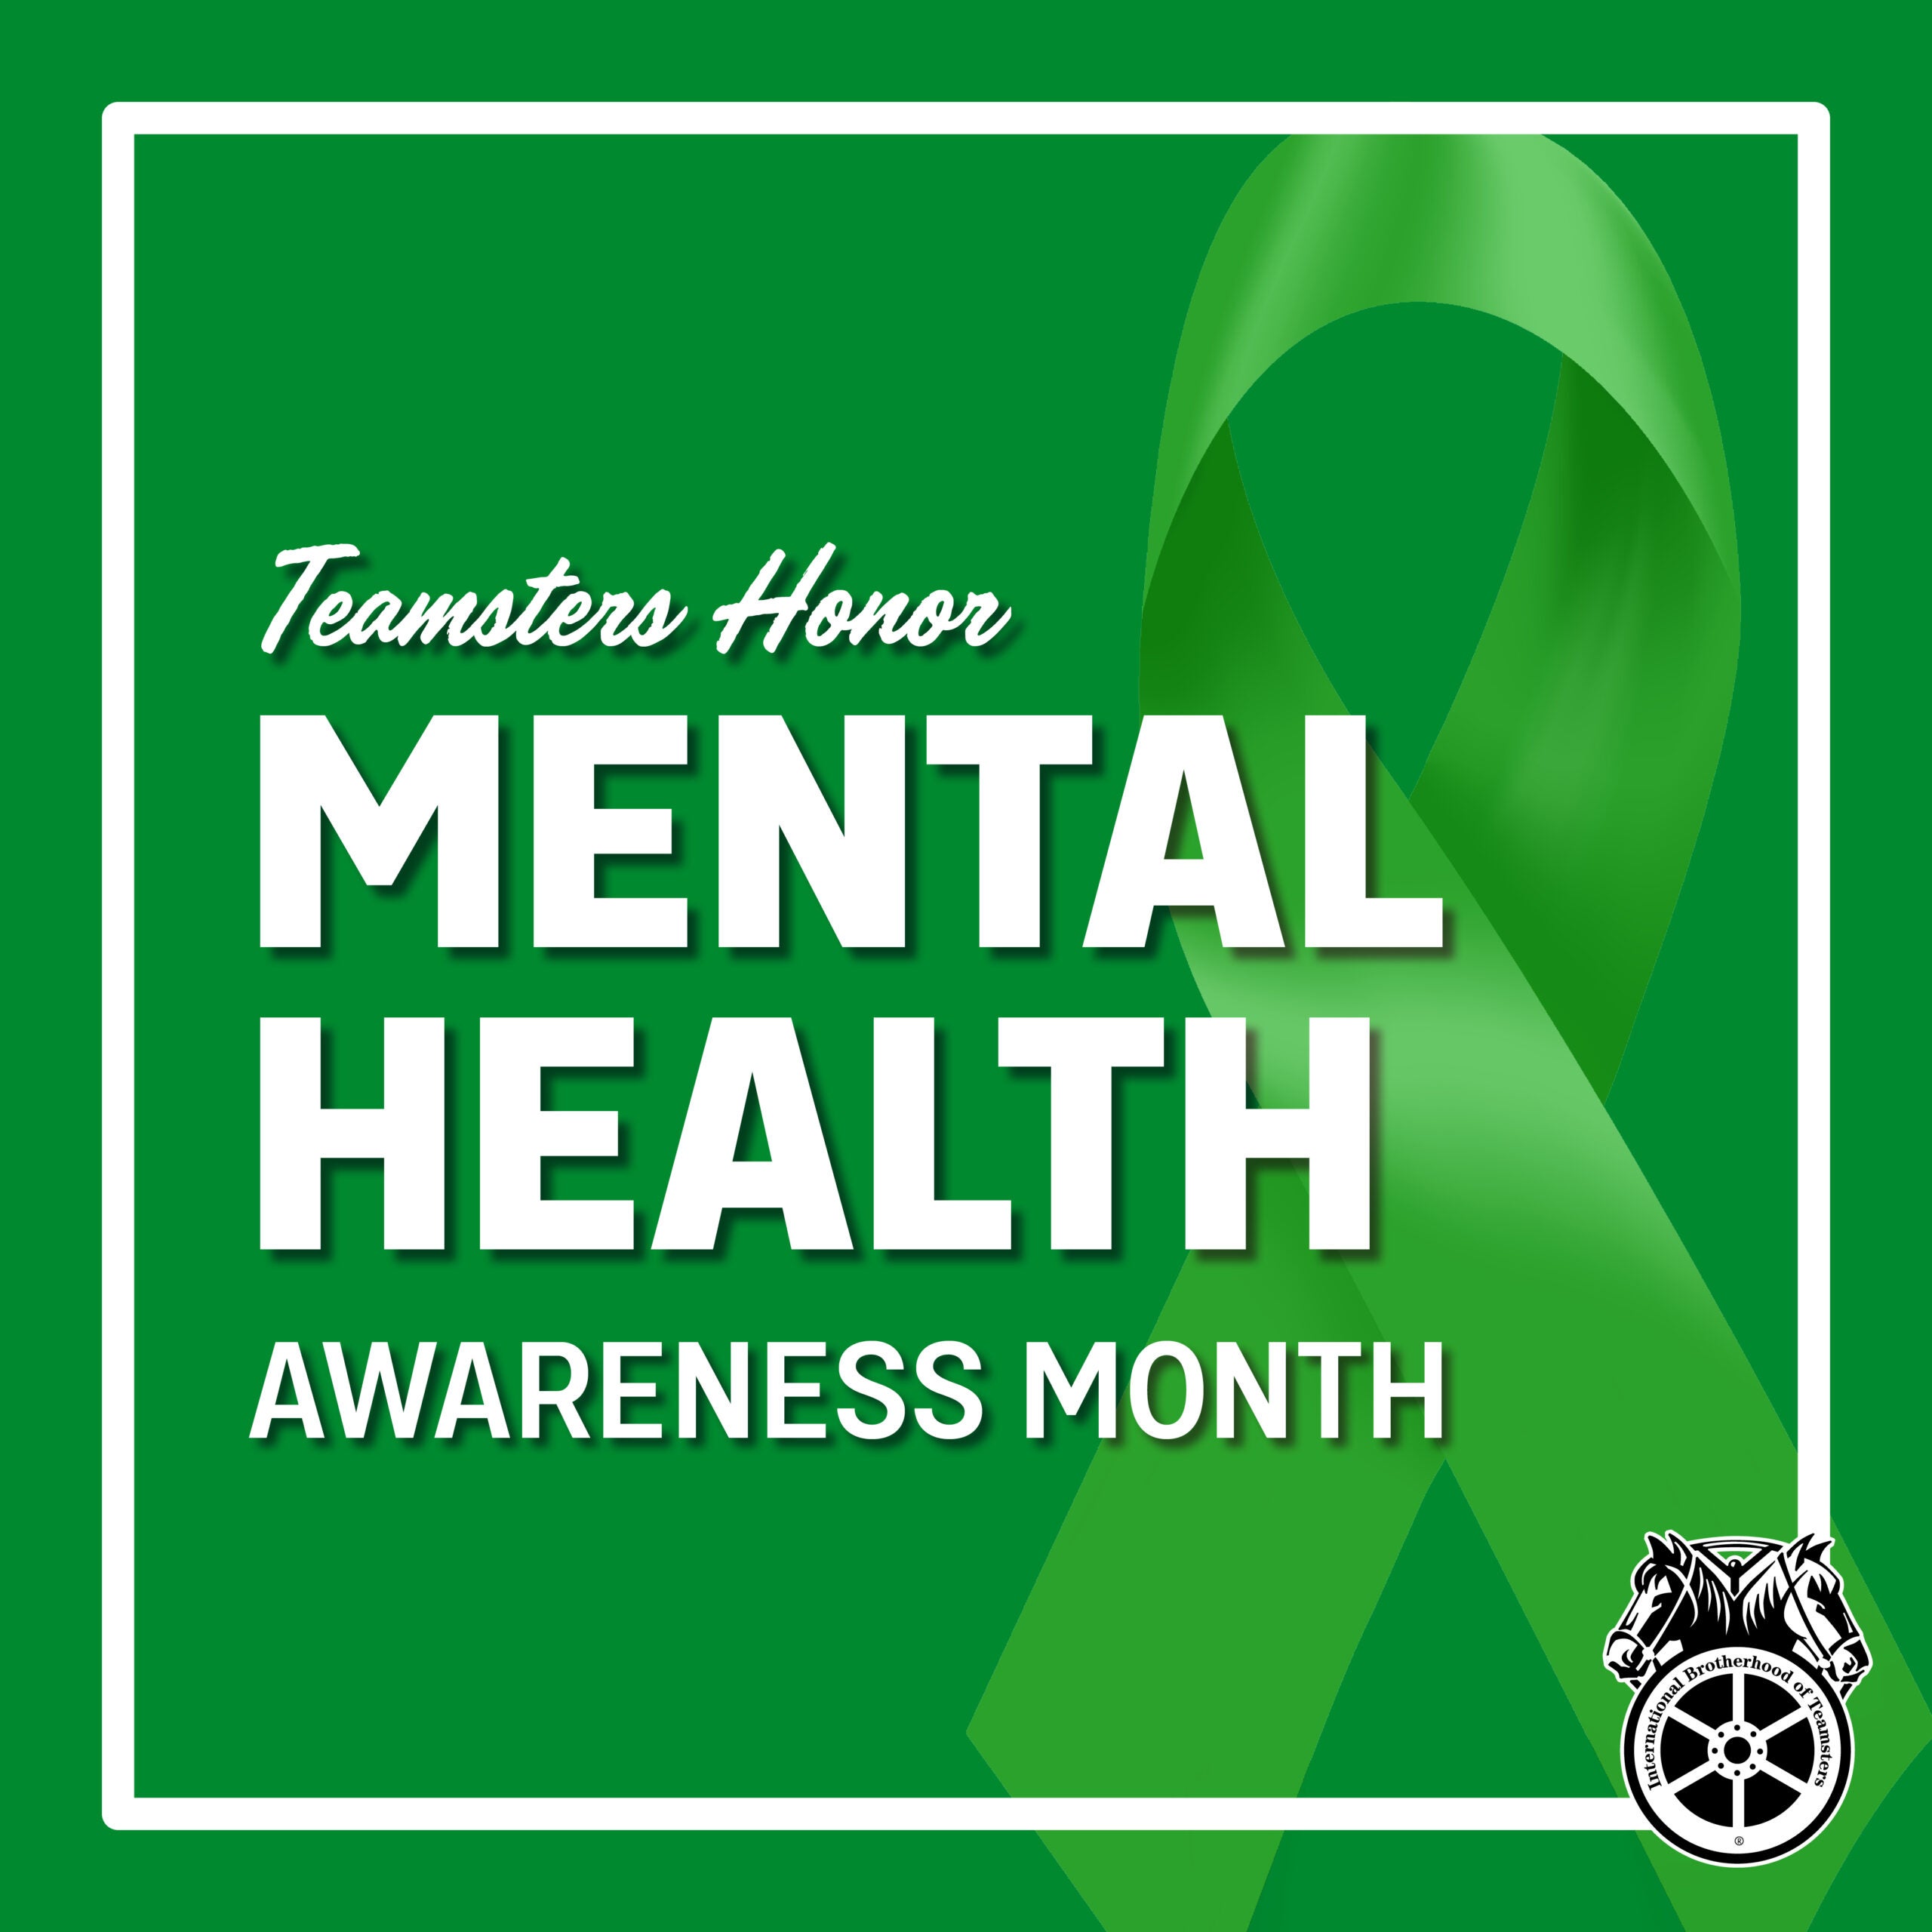 The Teamsters Acknowledge Mental Health Awareness Month